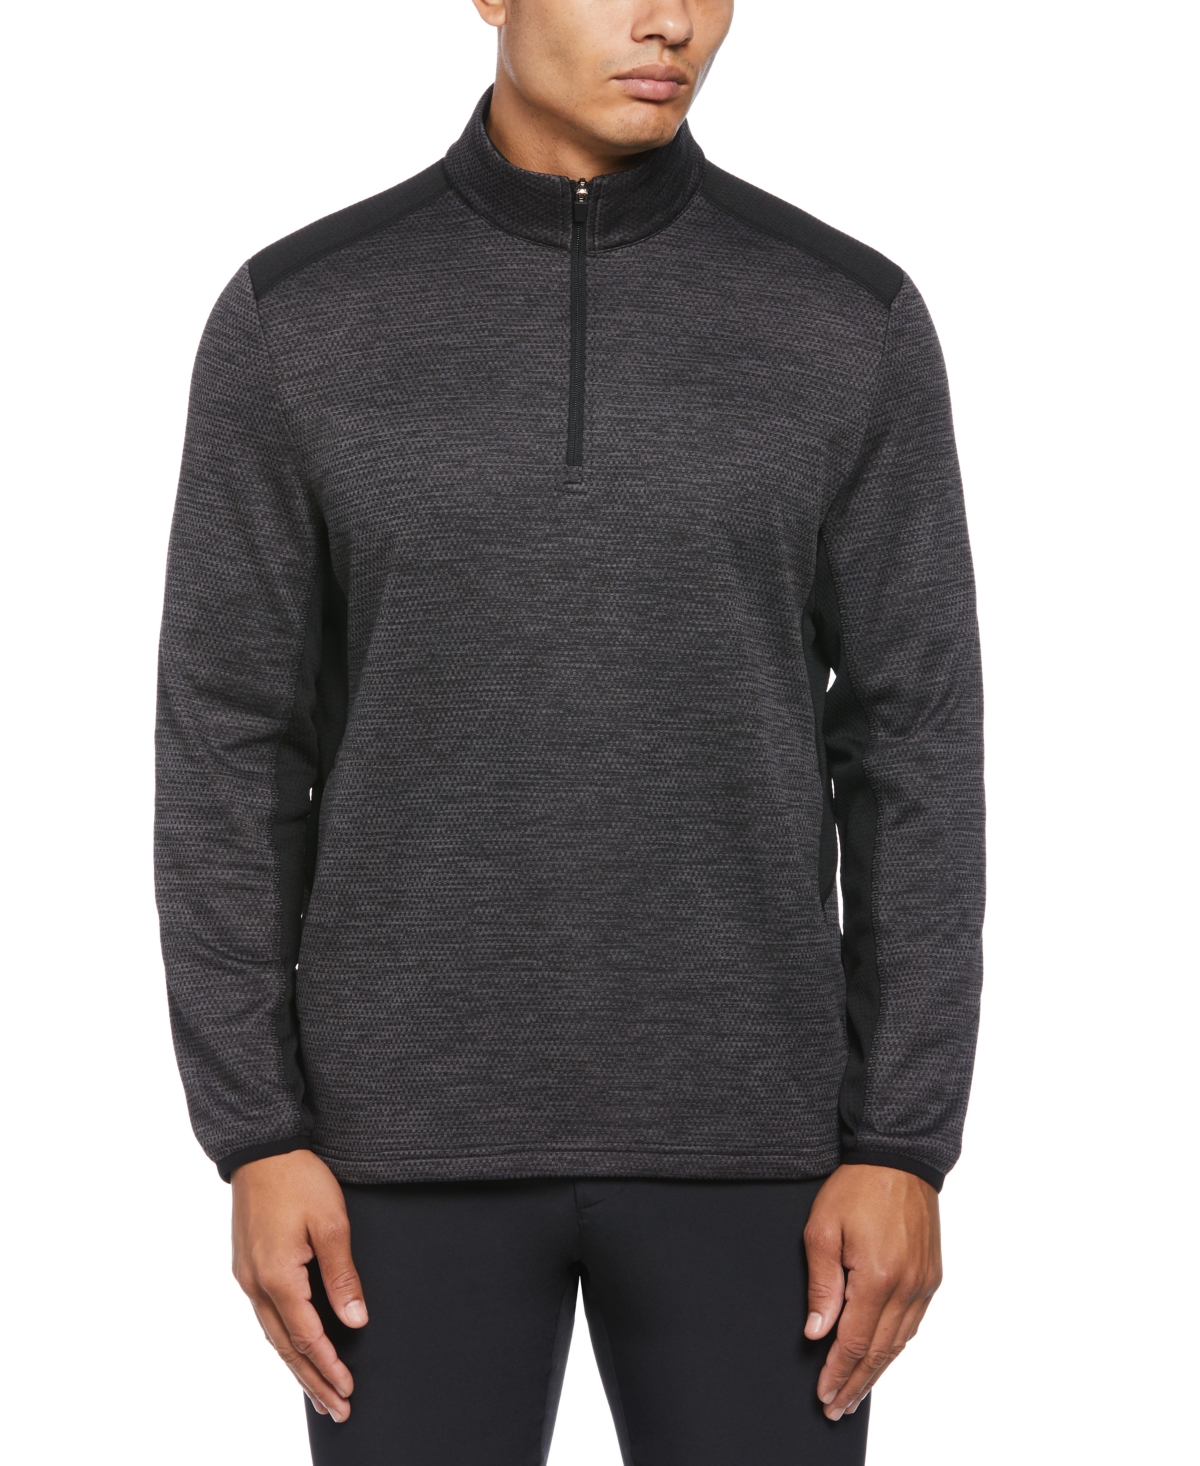 Men's Two-Tone Space-Dyed Quarter-Zip Golf Pullover - Peacoat Heather